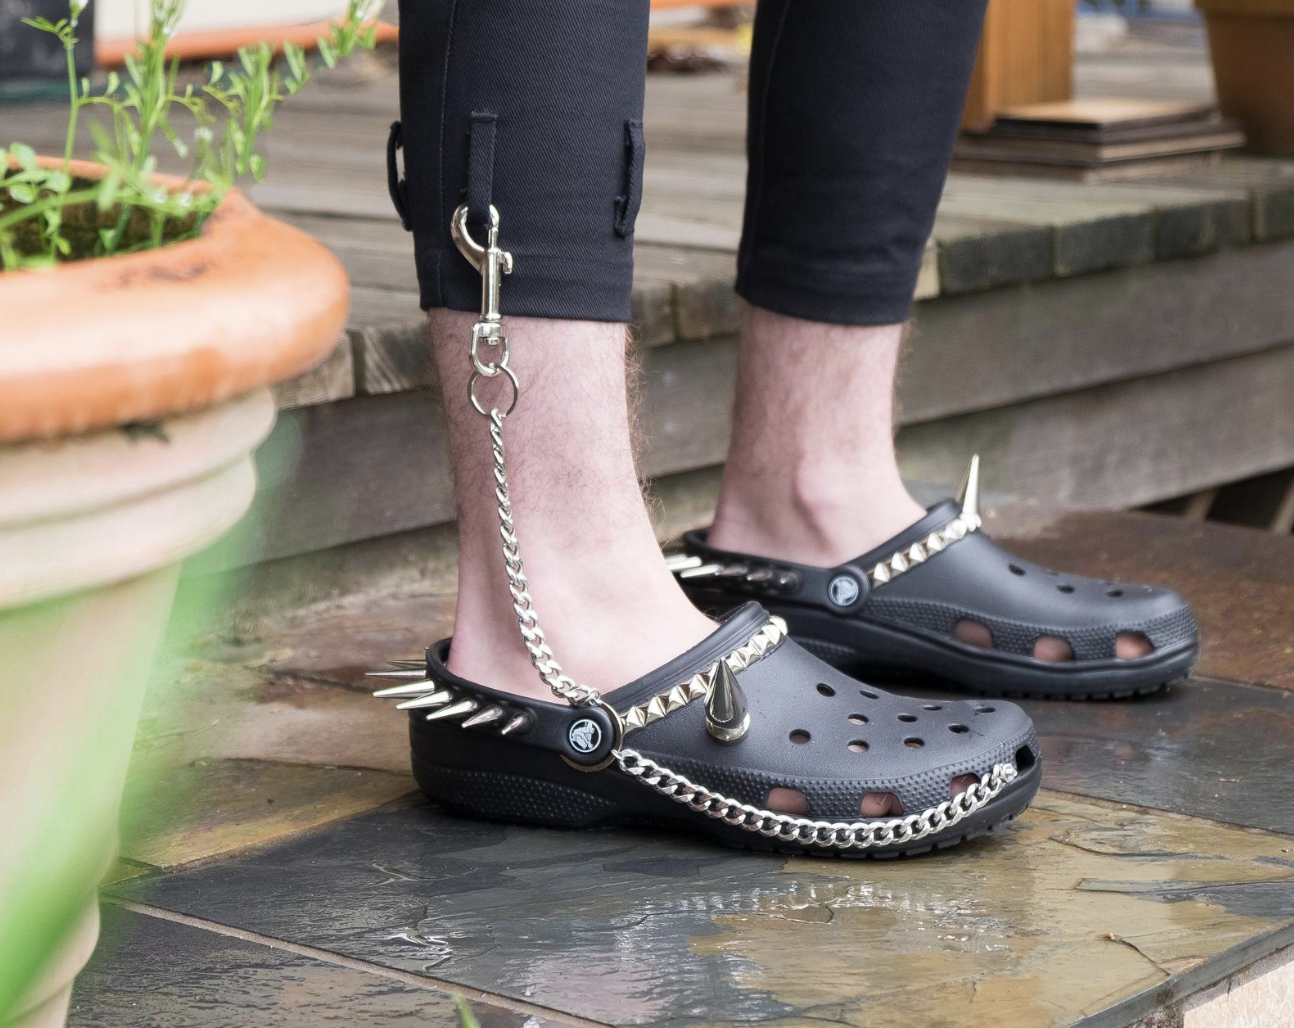 Punk Rock Crocs Are Real and Totally Dadass